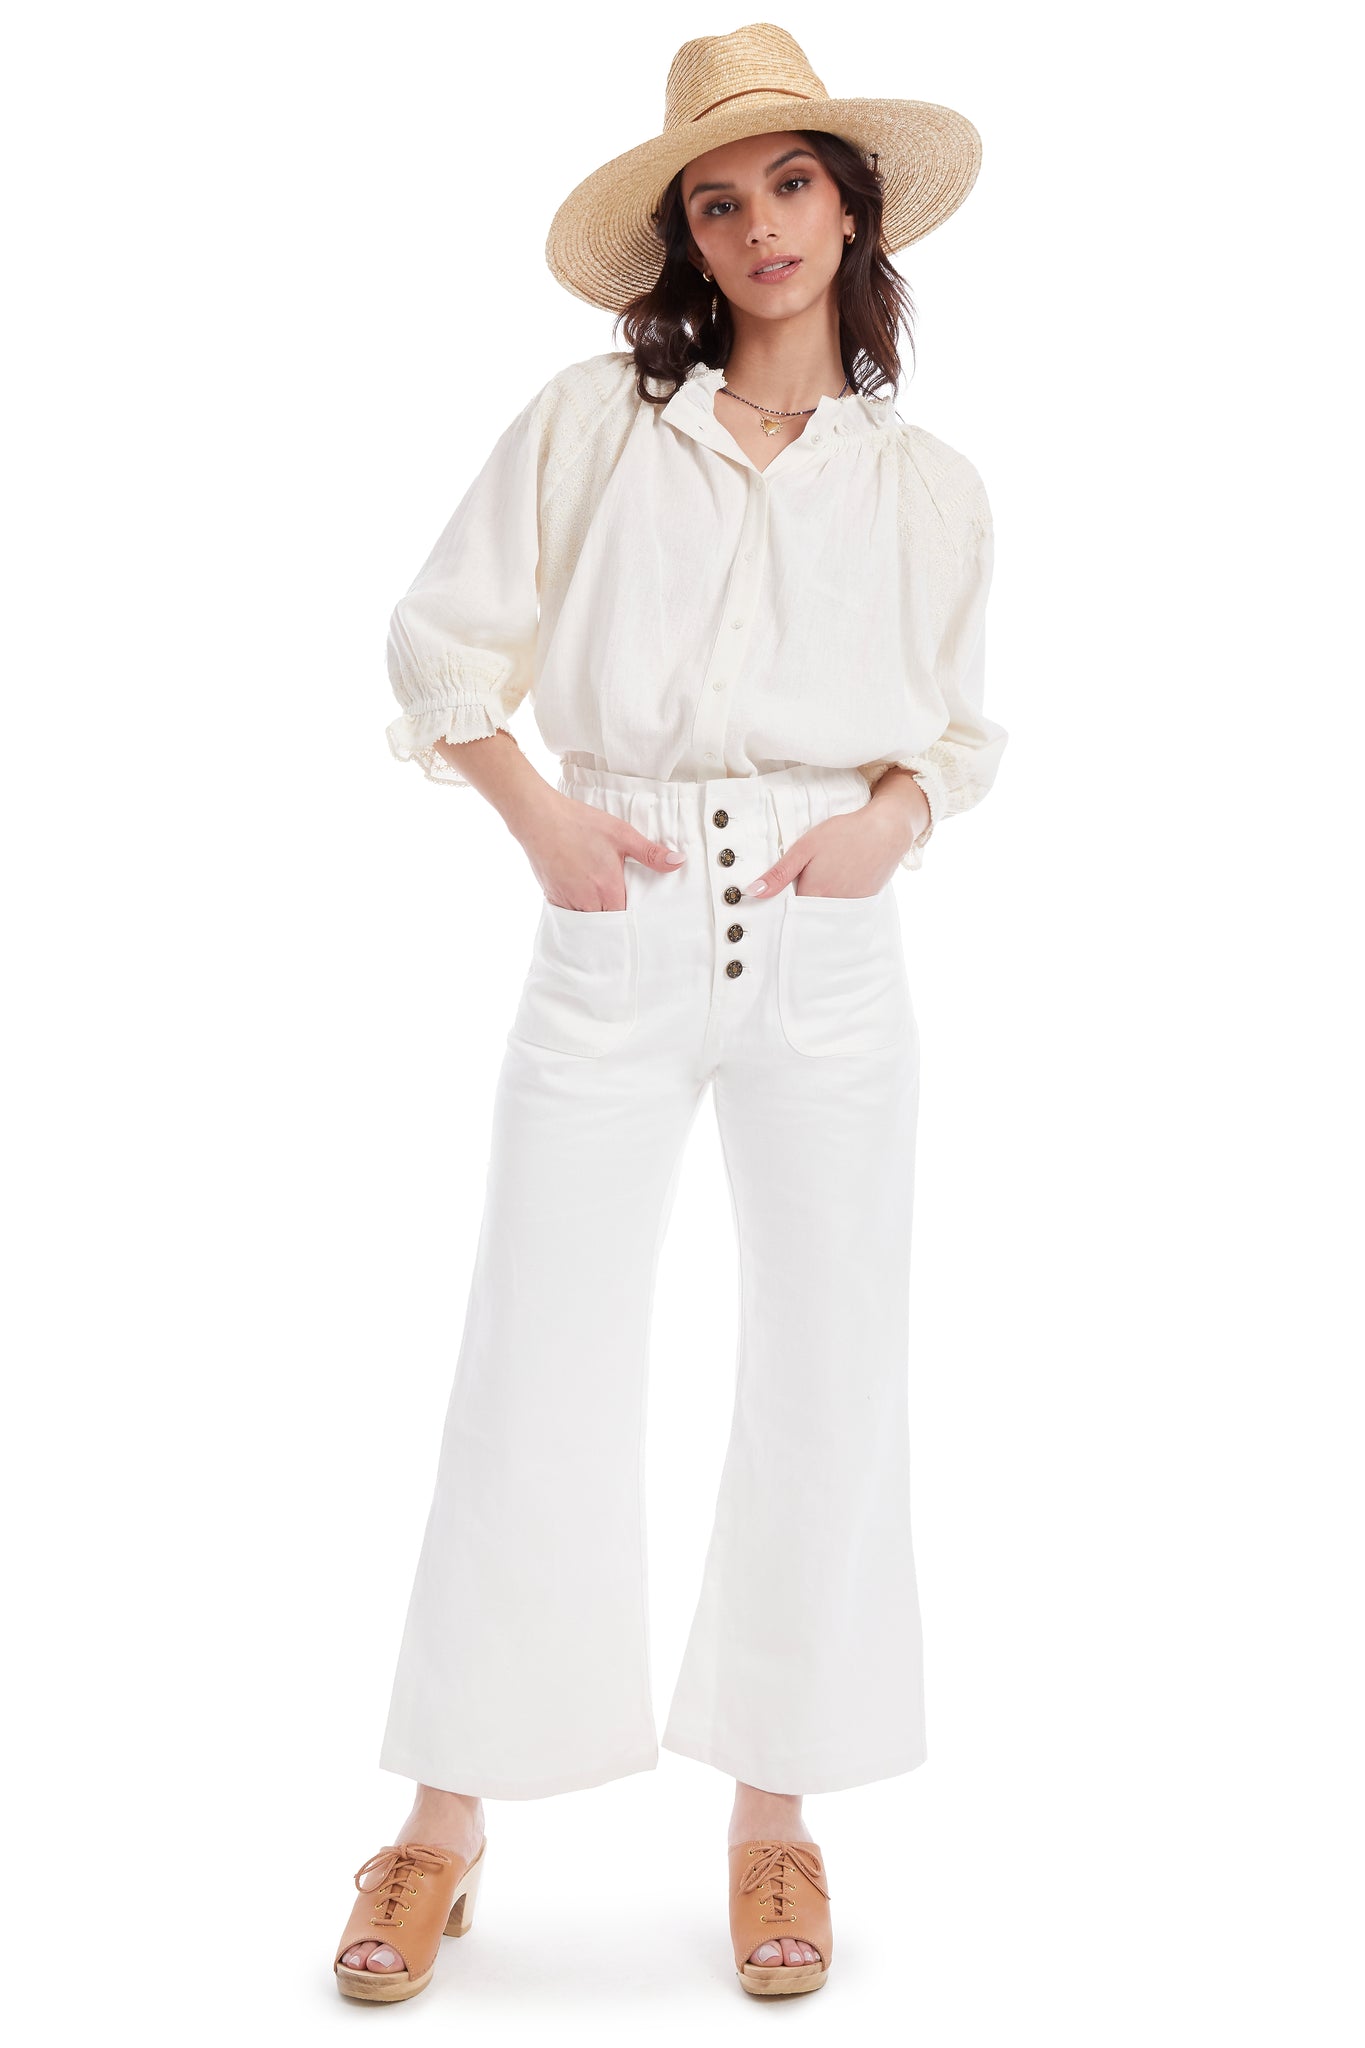 The Kentfield Top - White